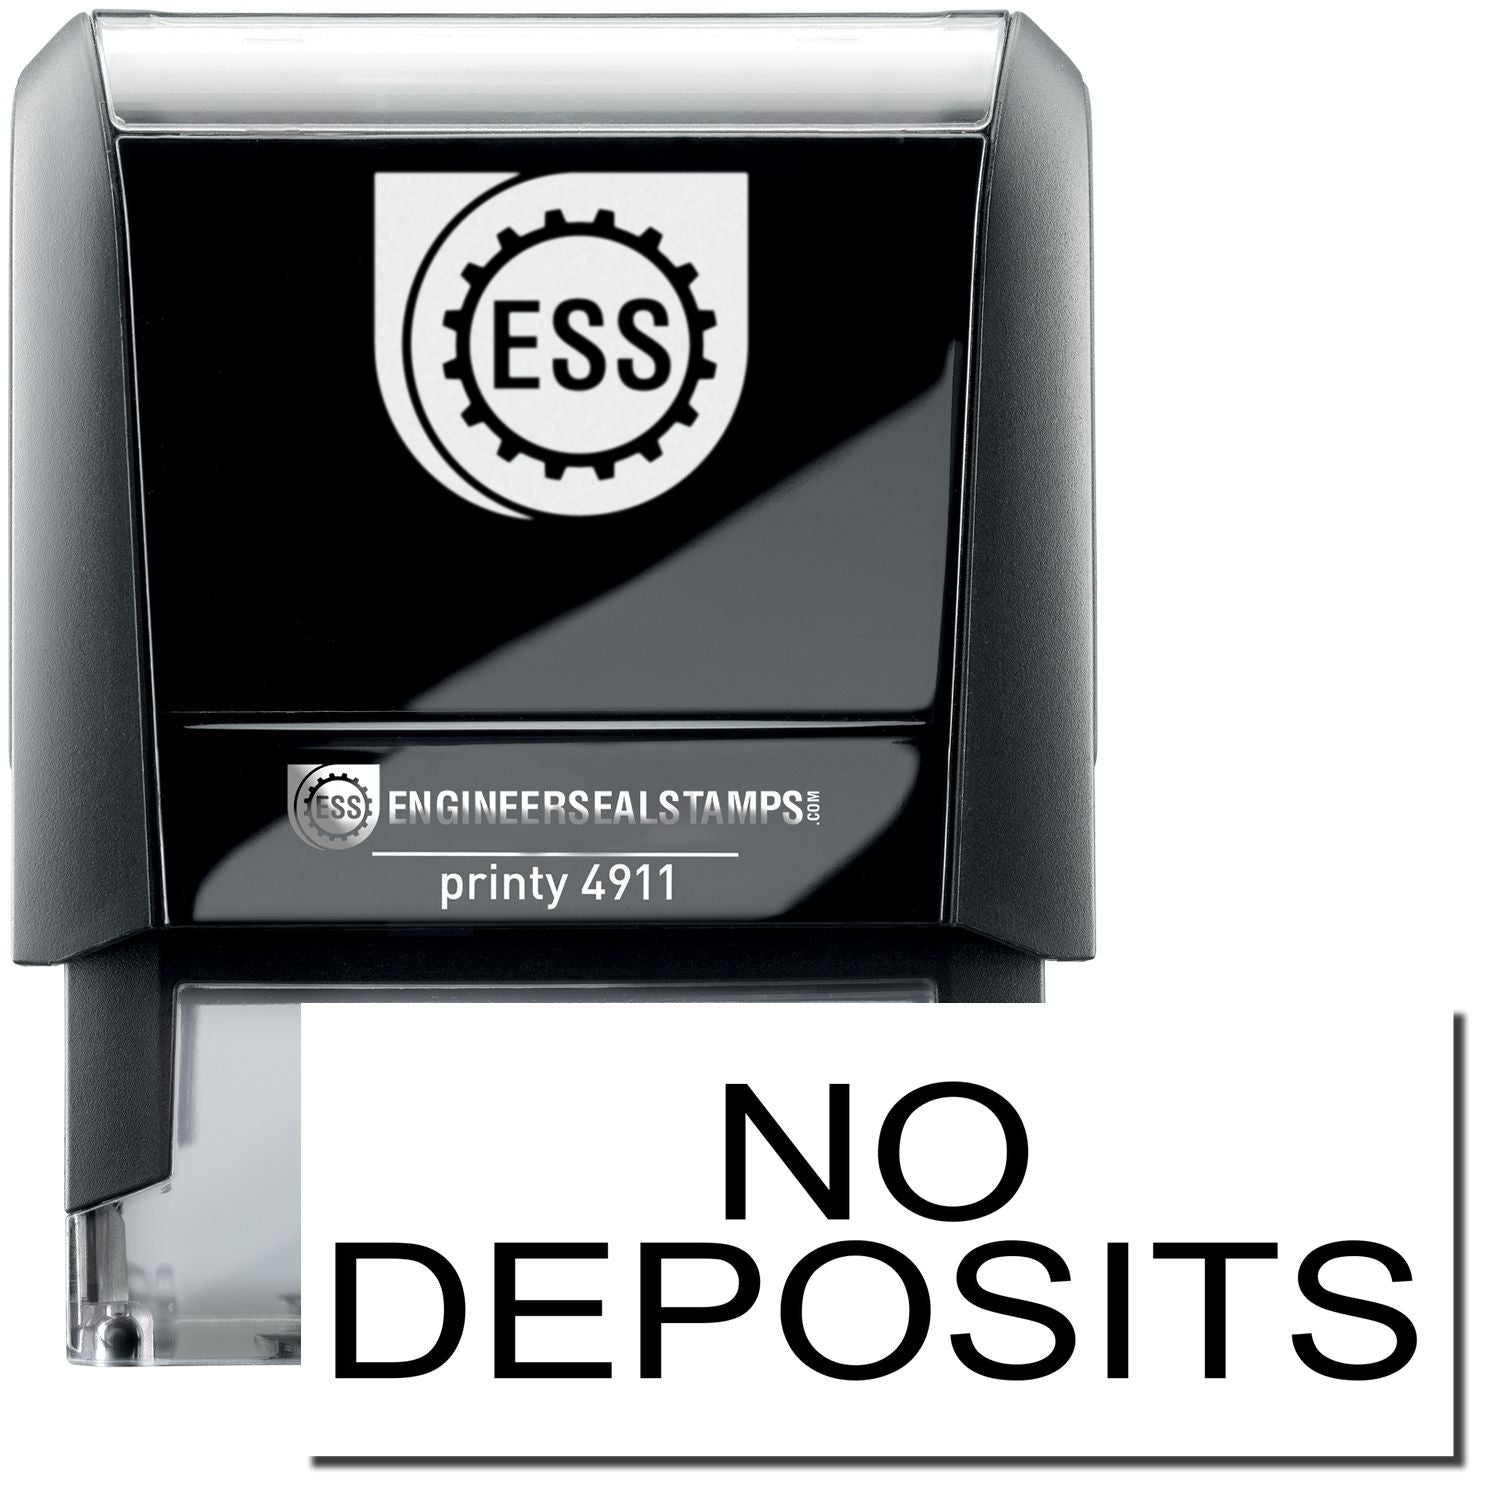 A self-inking stamp with a stamped image showing how the text "NO DEPOSITS" is displayed after stamping.